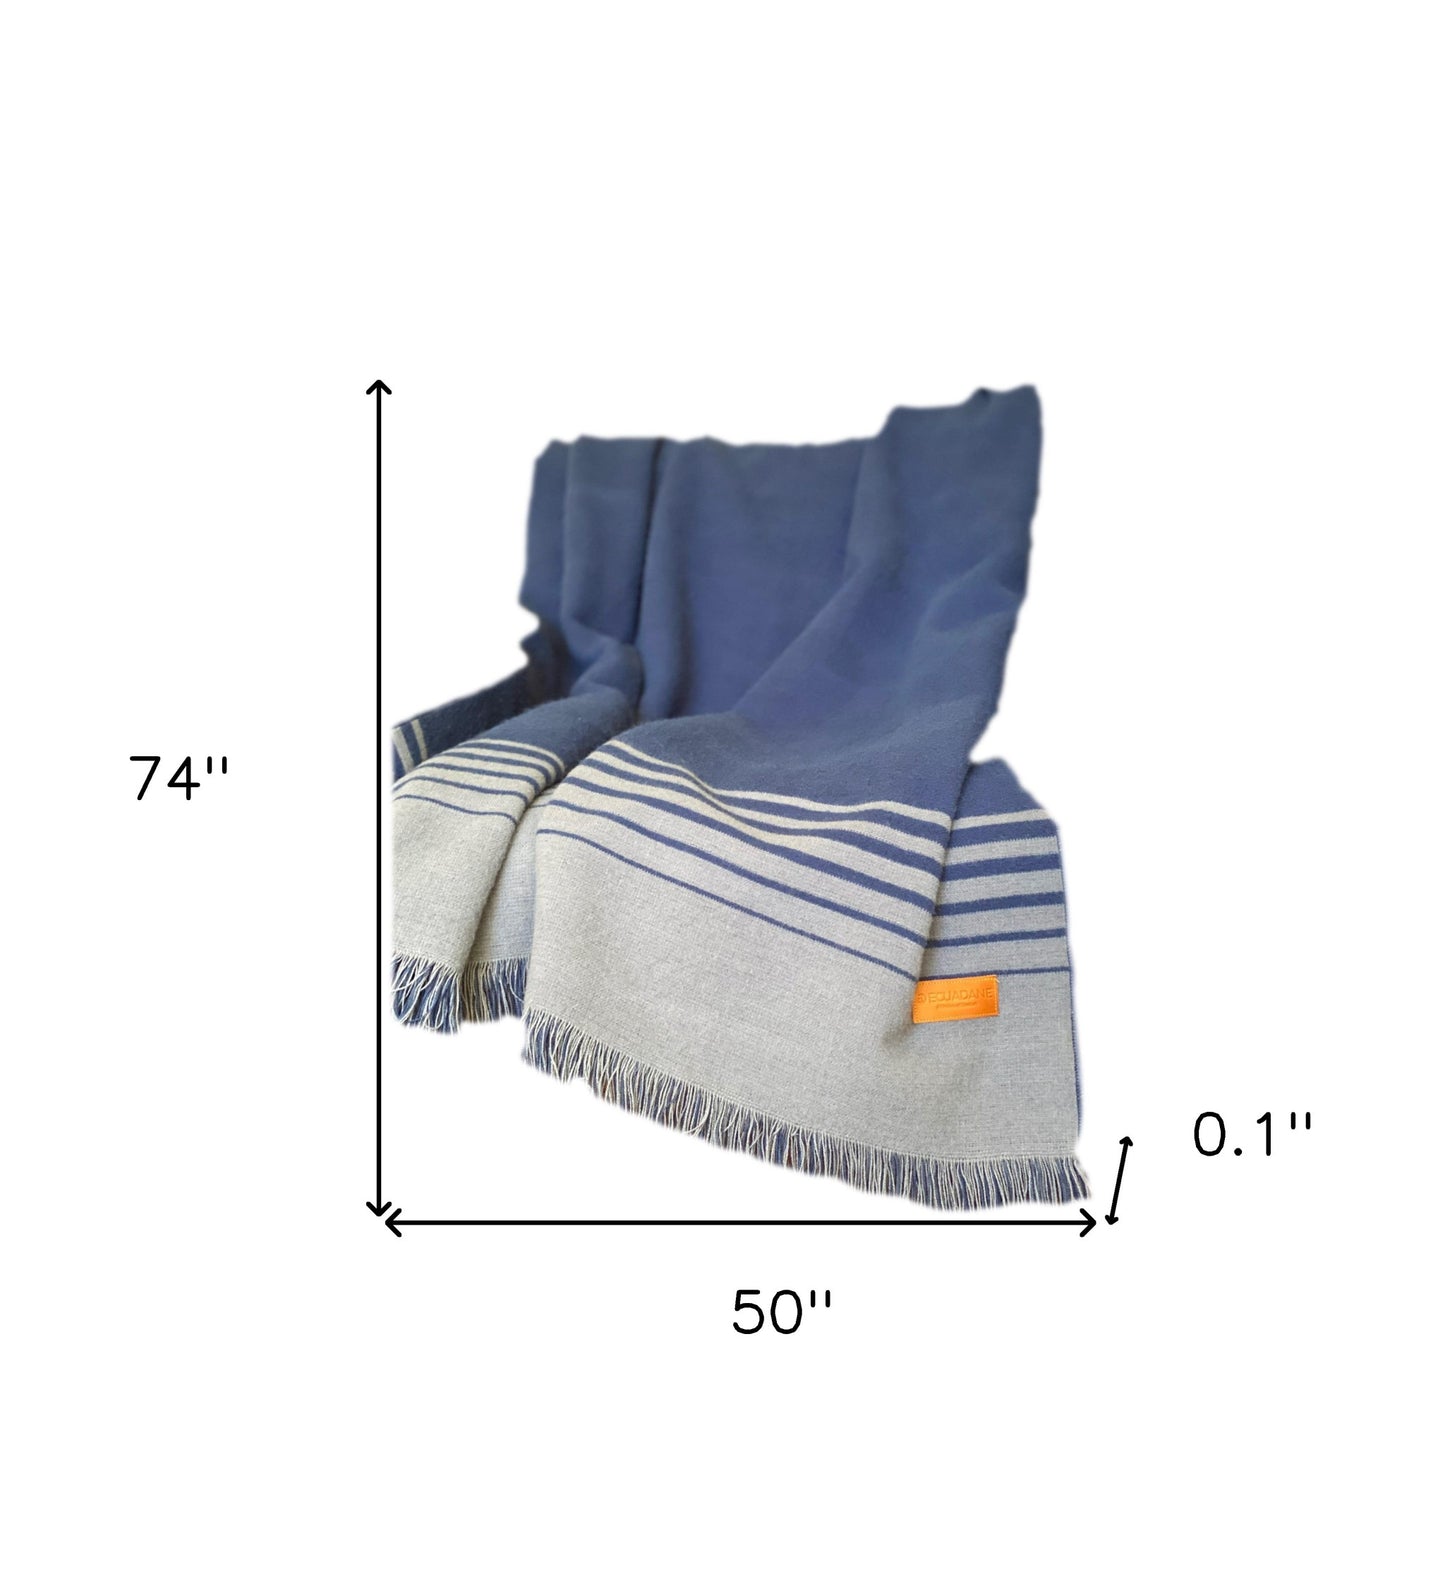 Blue and Gray Woven Microfiber Striped Throw Blanket with Fringe